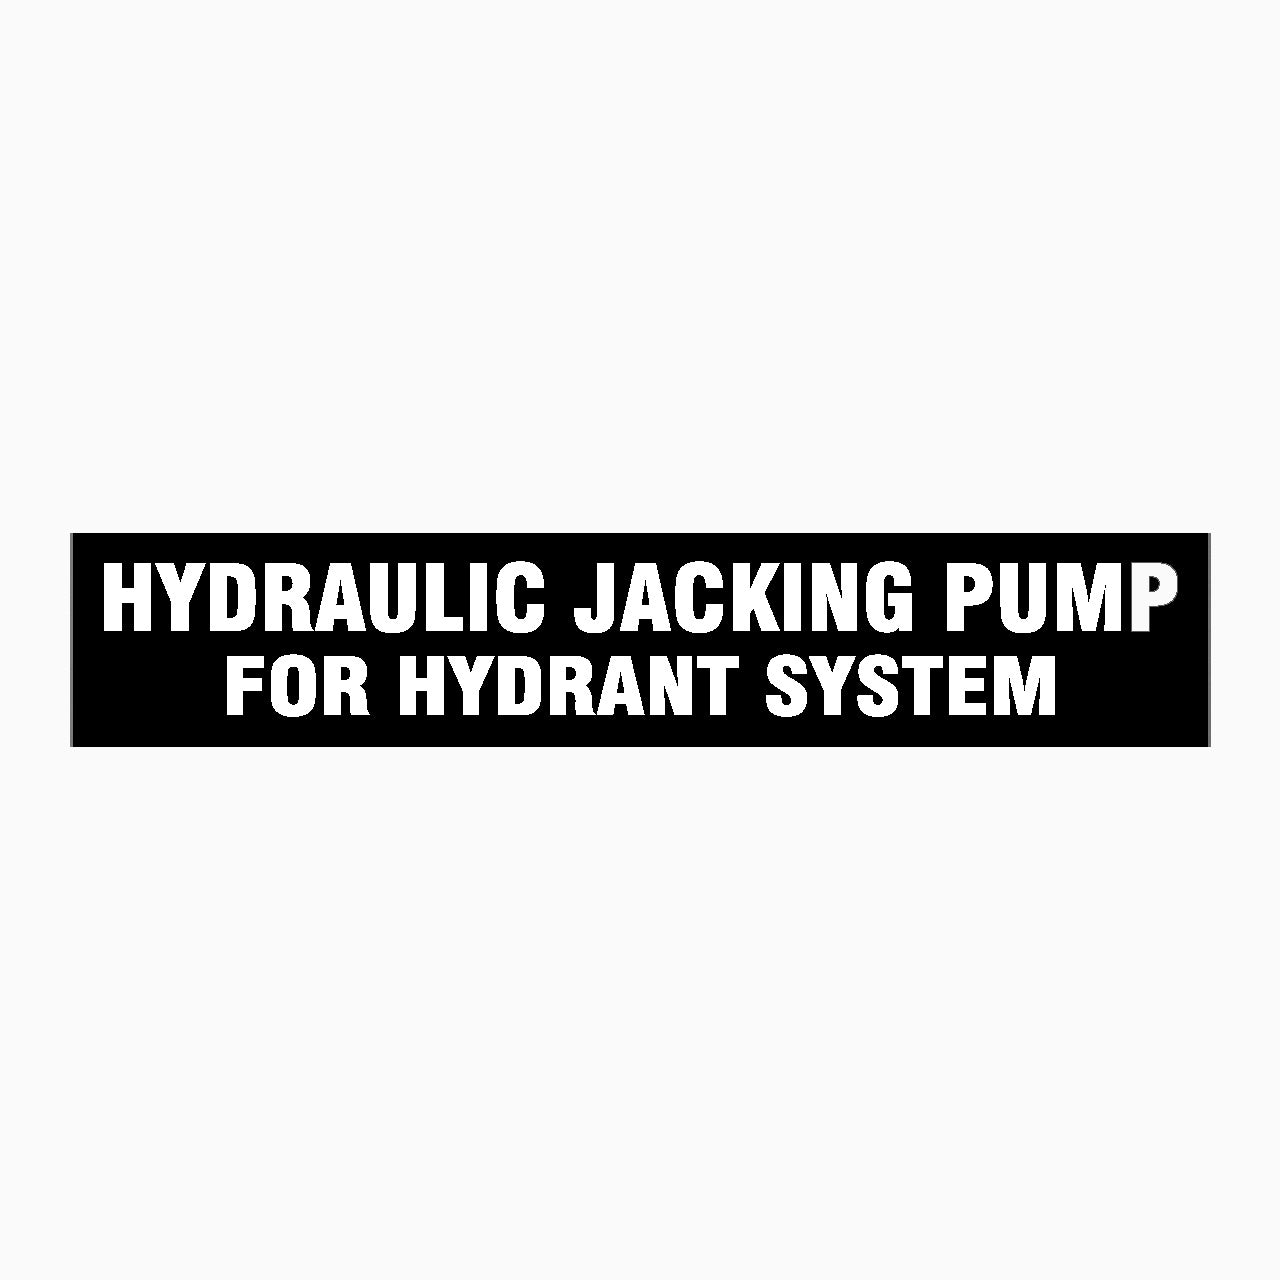 HYDRAULIC JACKING PUMP FOR HYDRANT SYSTEM SIGN